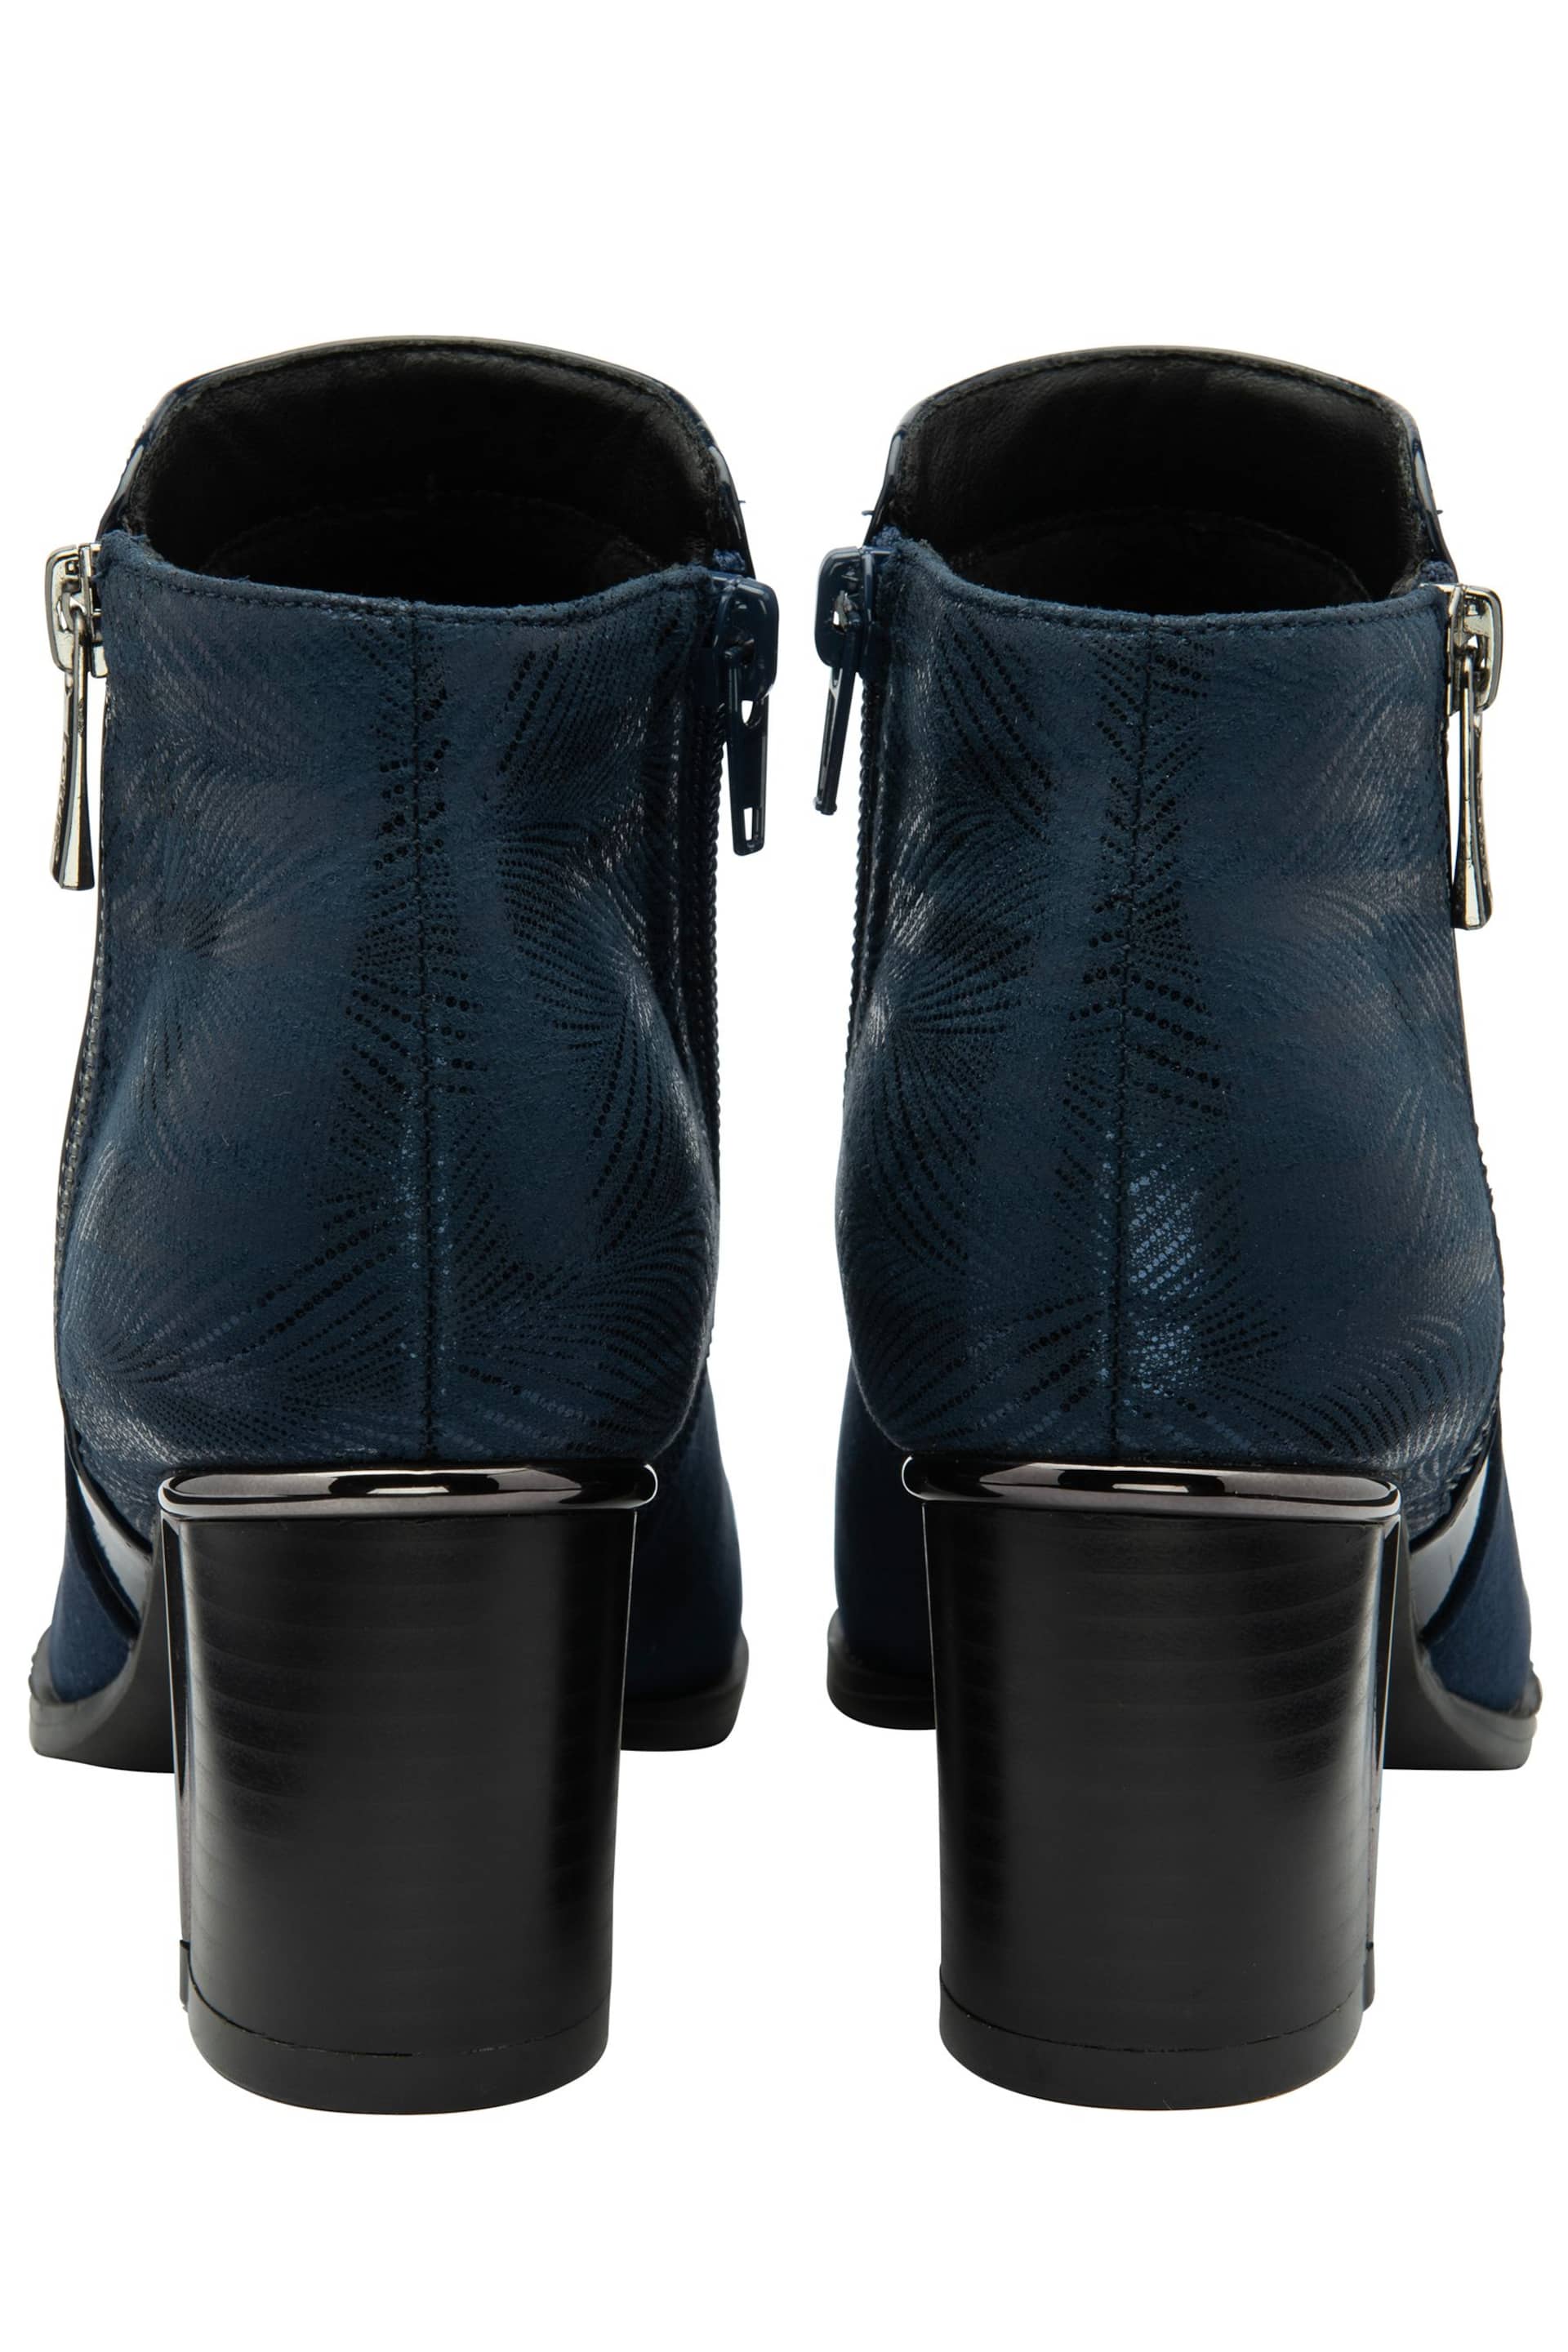 Lotus Blue Ankle Boots - Image 3 of 4